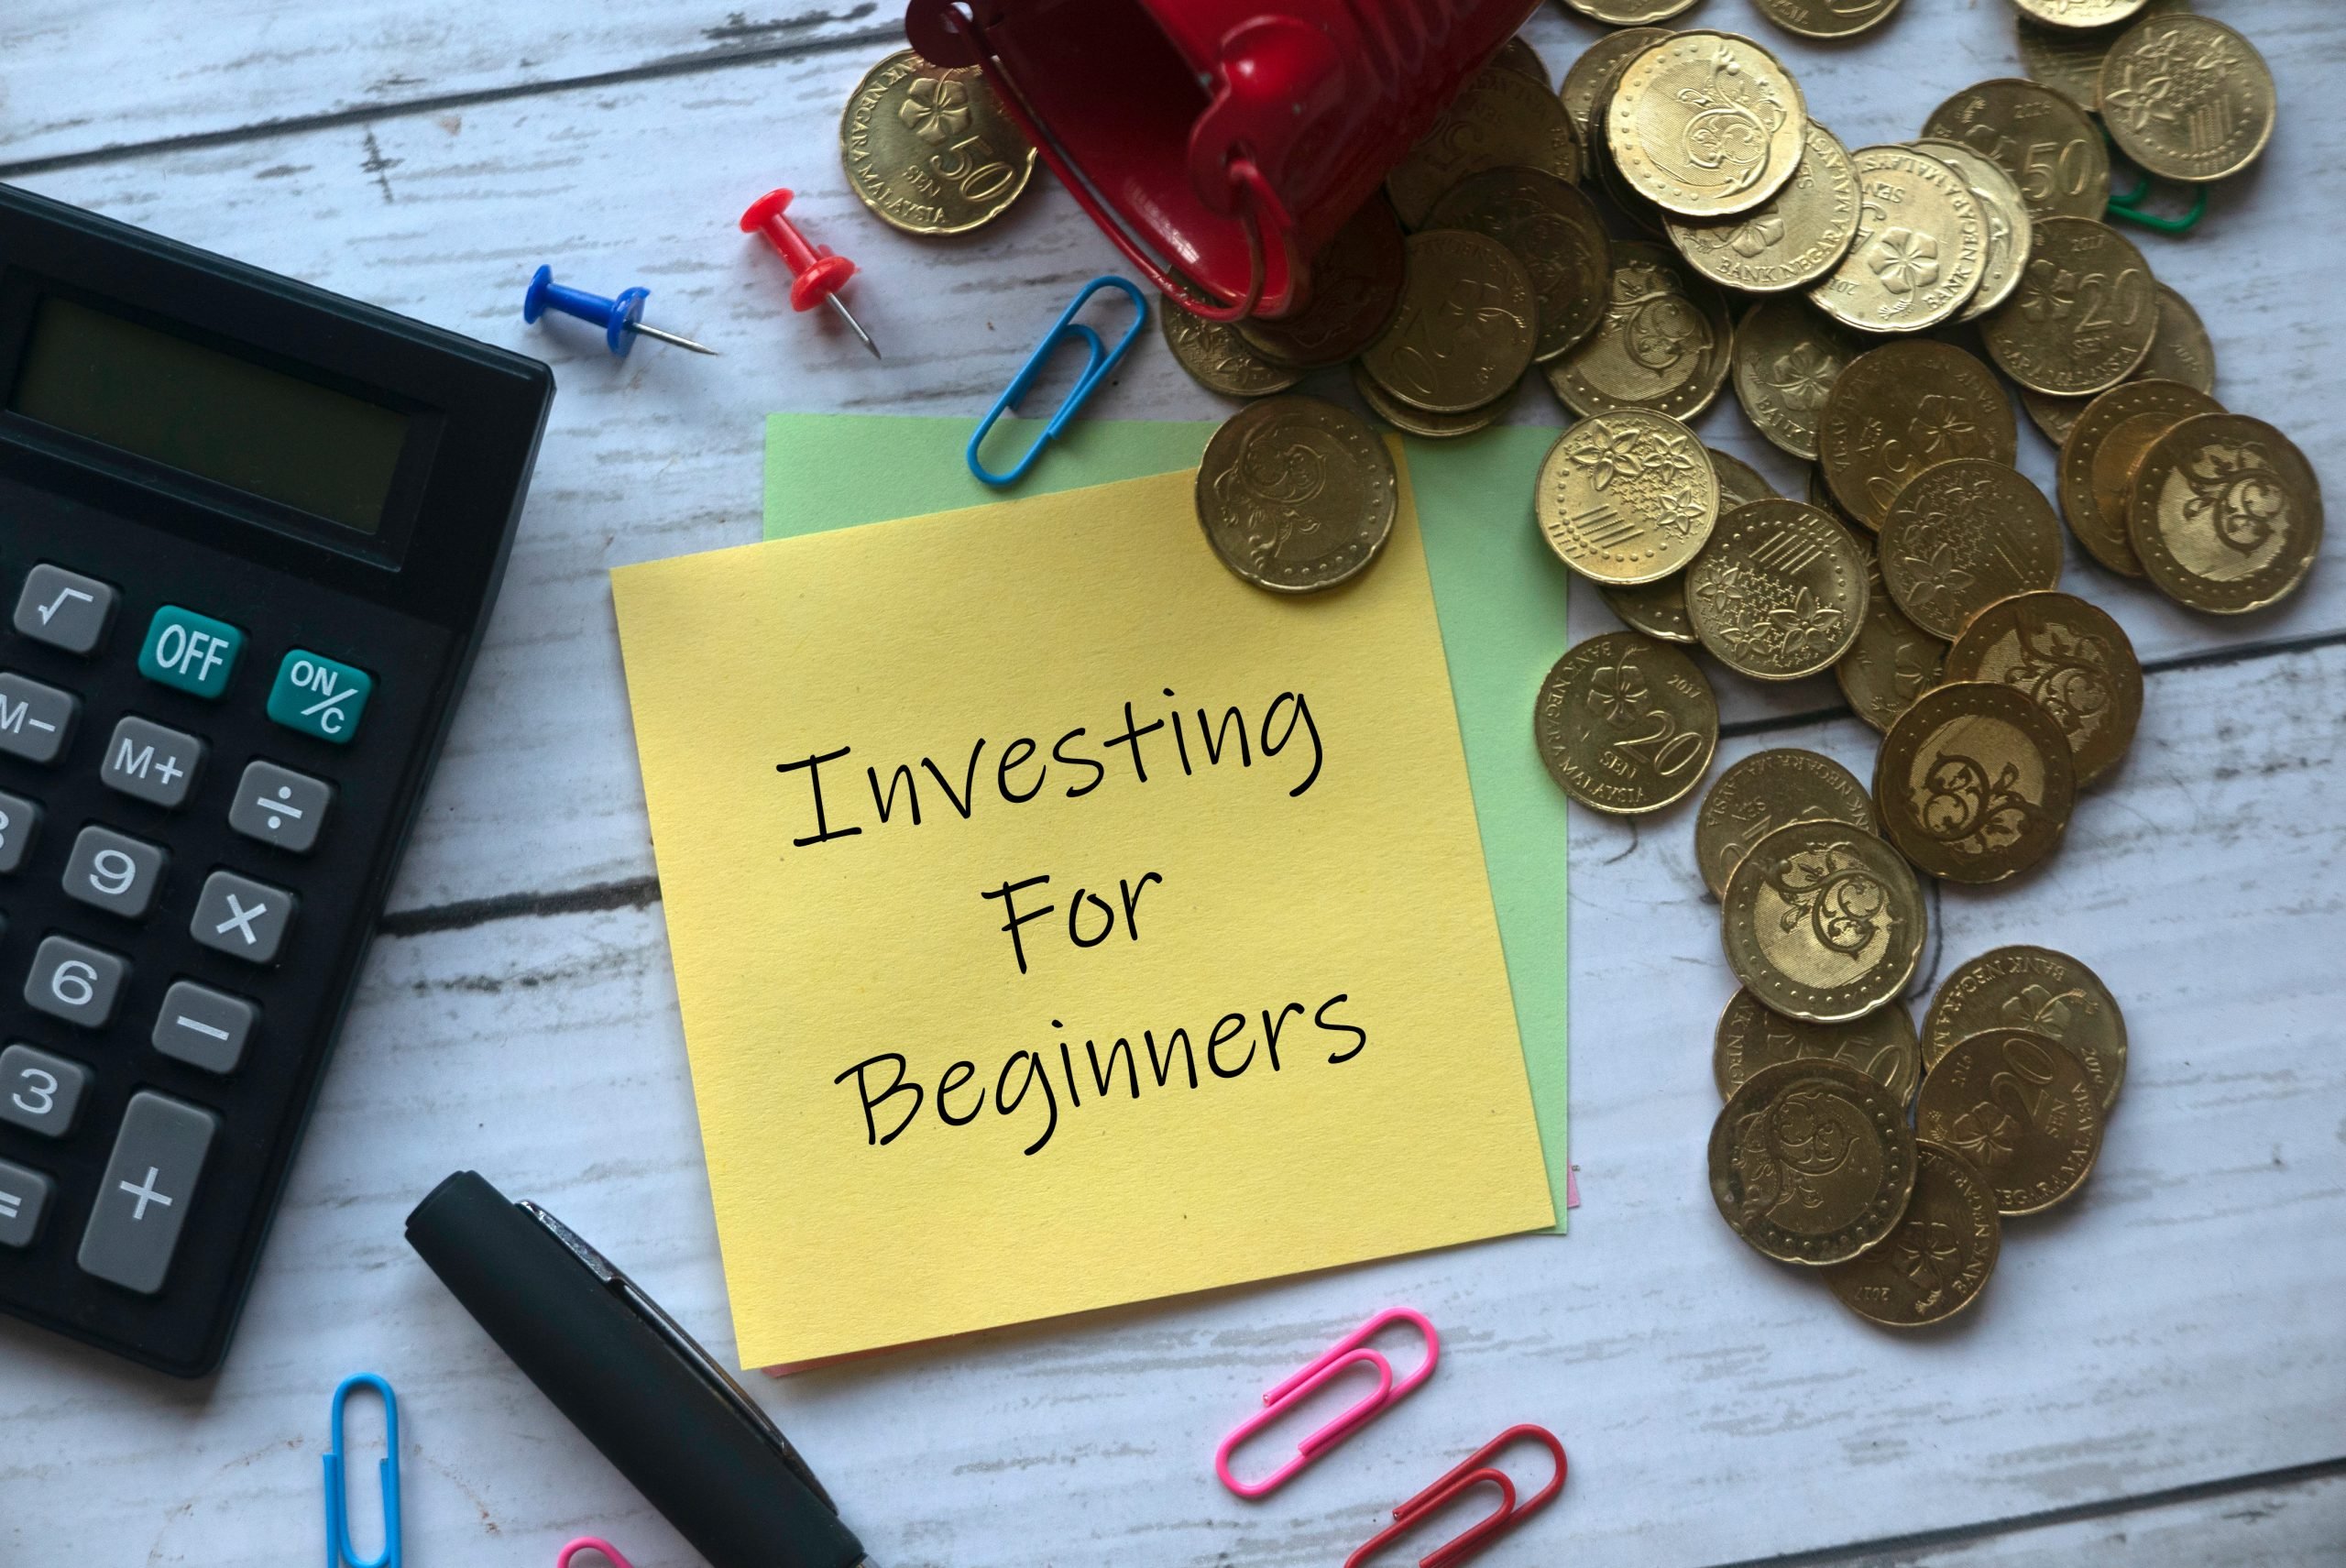 investing for beginners post it concept